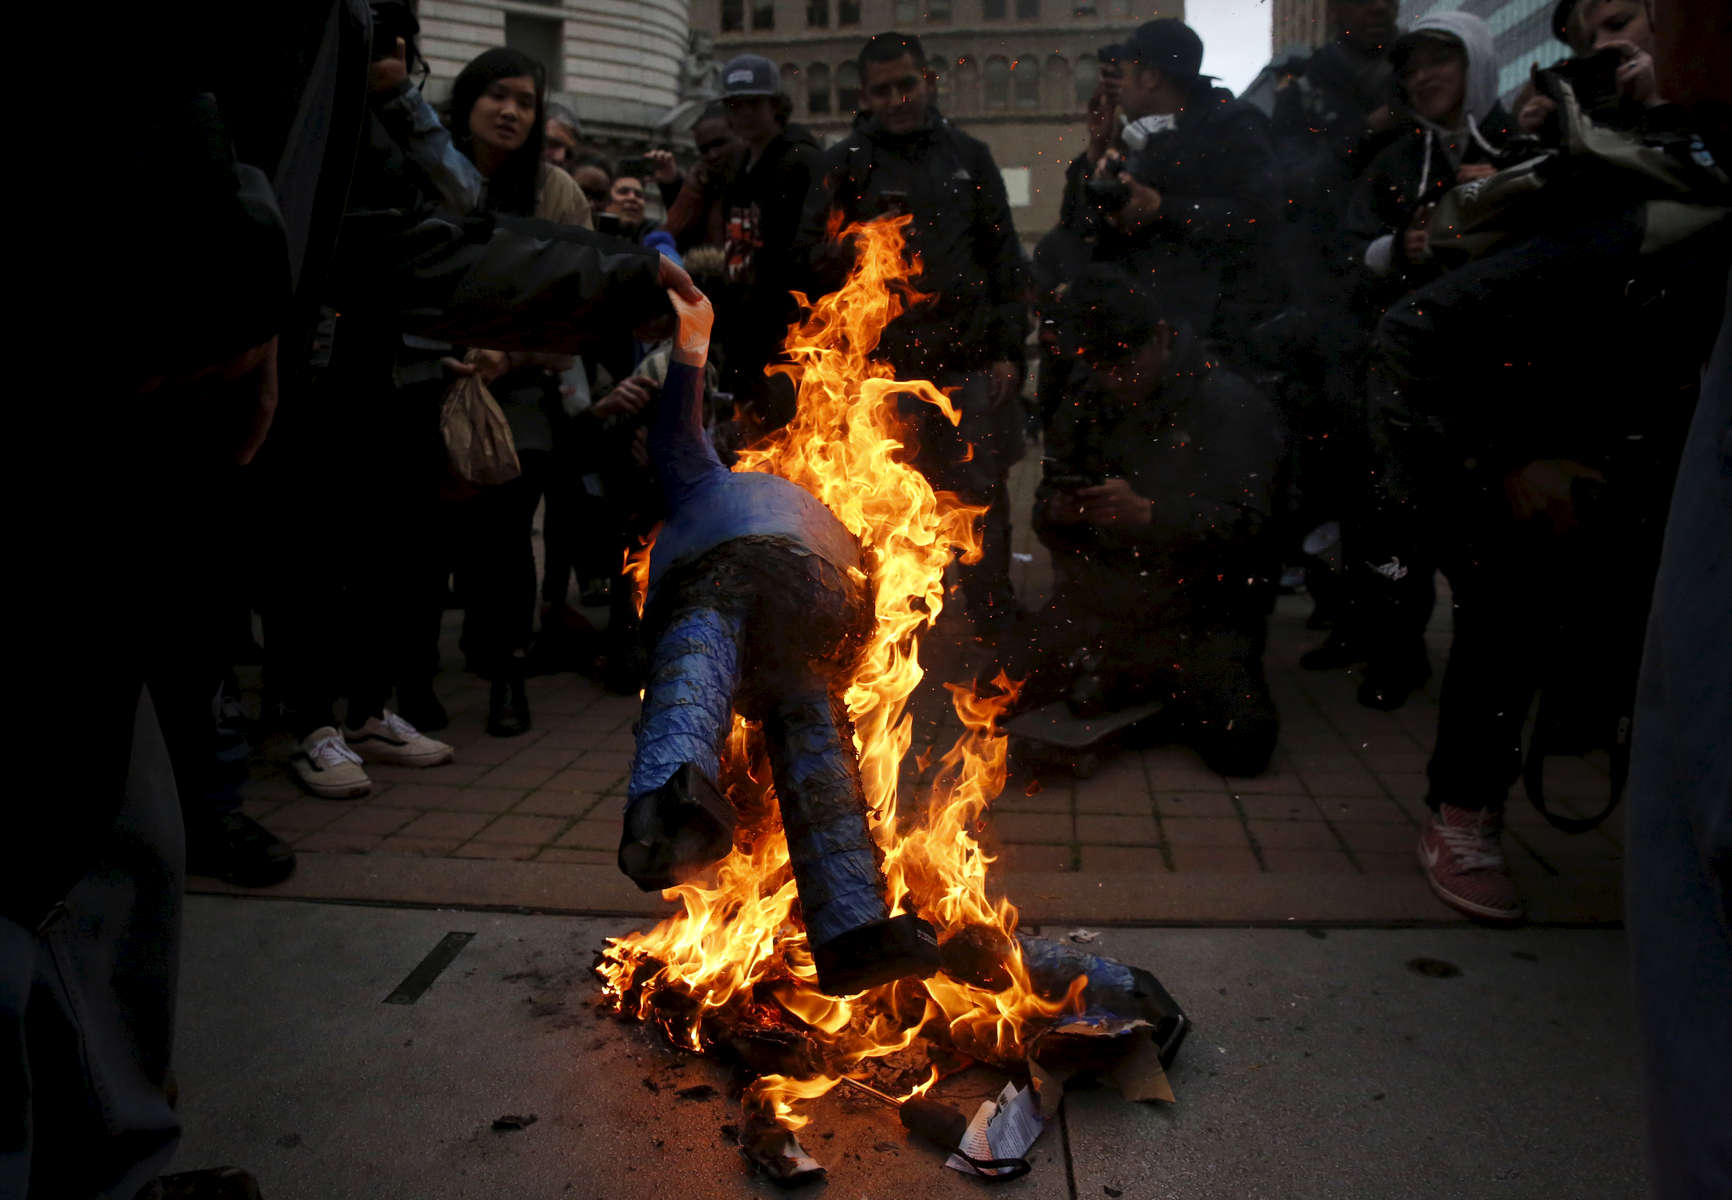 Protesters burn a Donald J. Trump piñata in Frank Ogawa Plaza during an anti-Trump protest on the evening of his presidential inauguration Jan. 20, 2017 in Oakland, Calif.